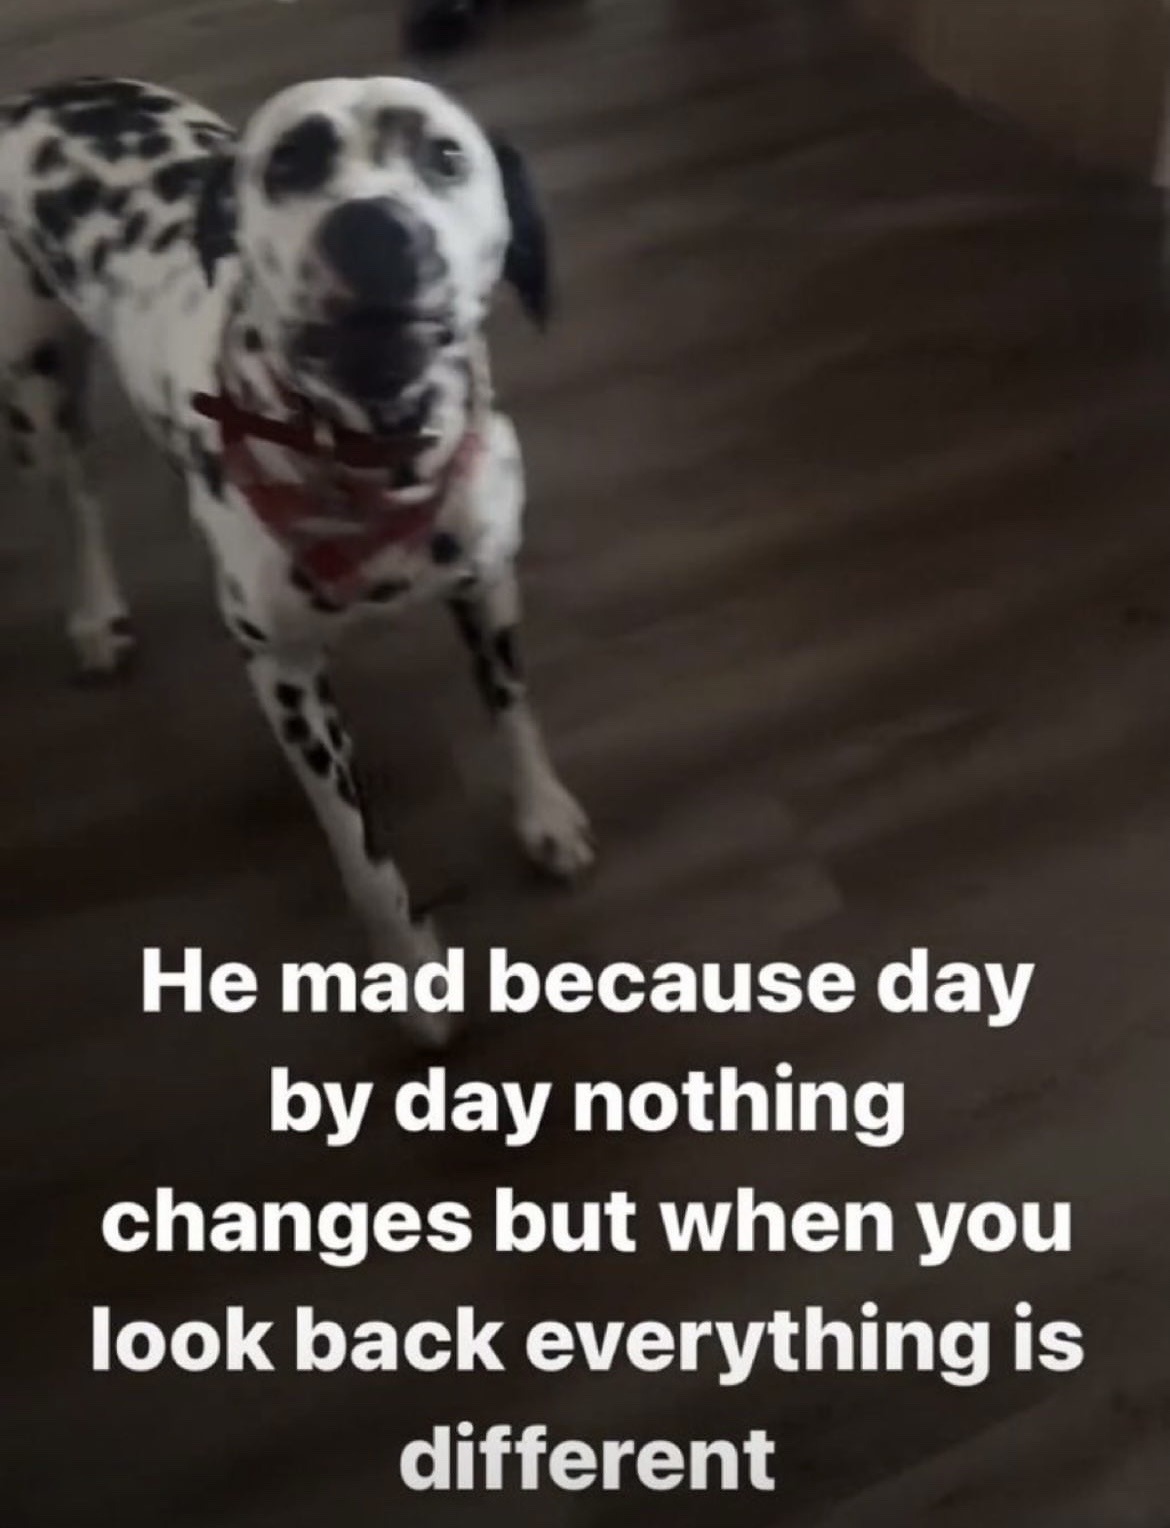 a photo of a dalmatian dog. there is text over the image that reads: 'He mad because day by day nothing changes but when you look back everything is different'